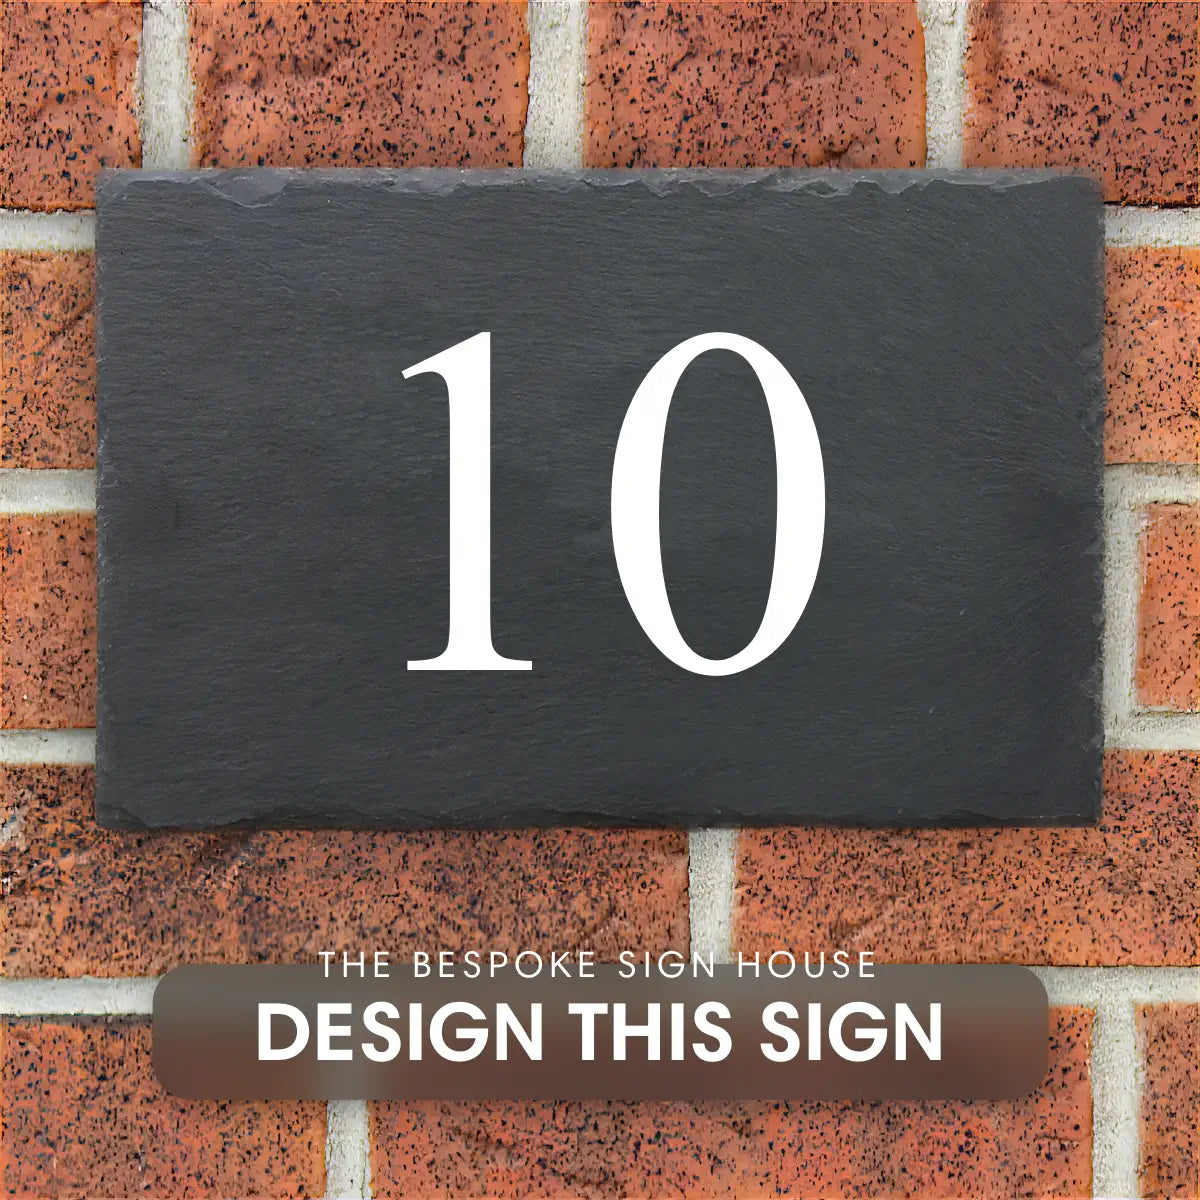 Welsh slate house sign with the number 10 engraved on it